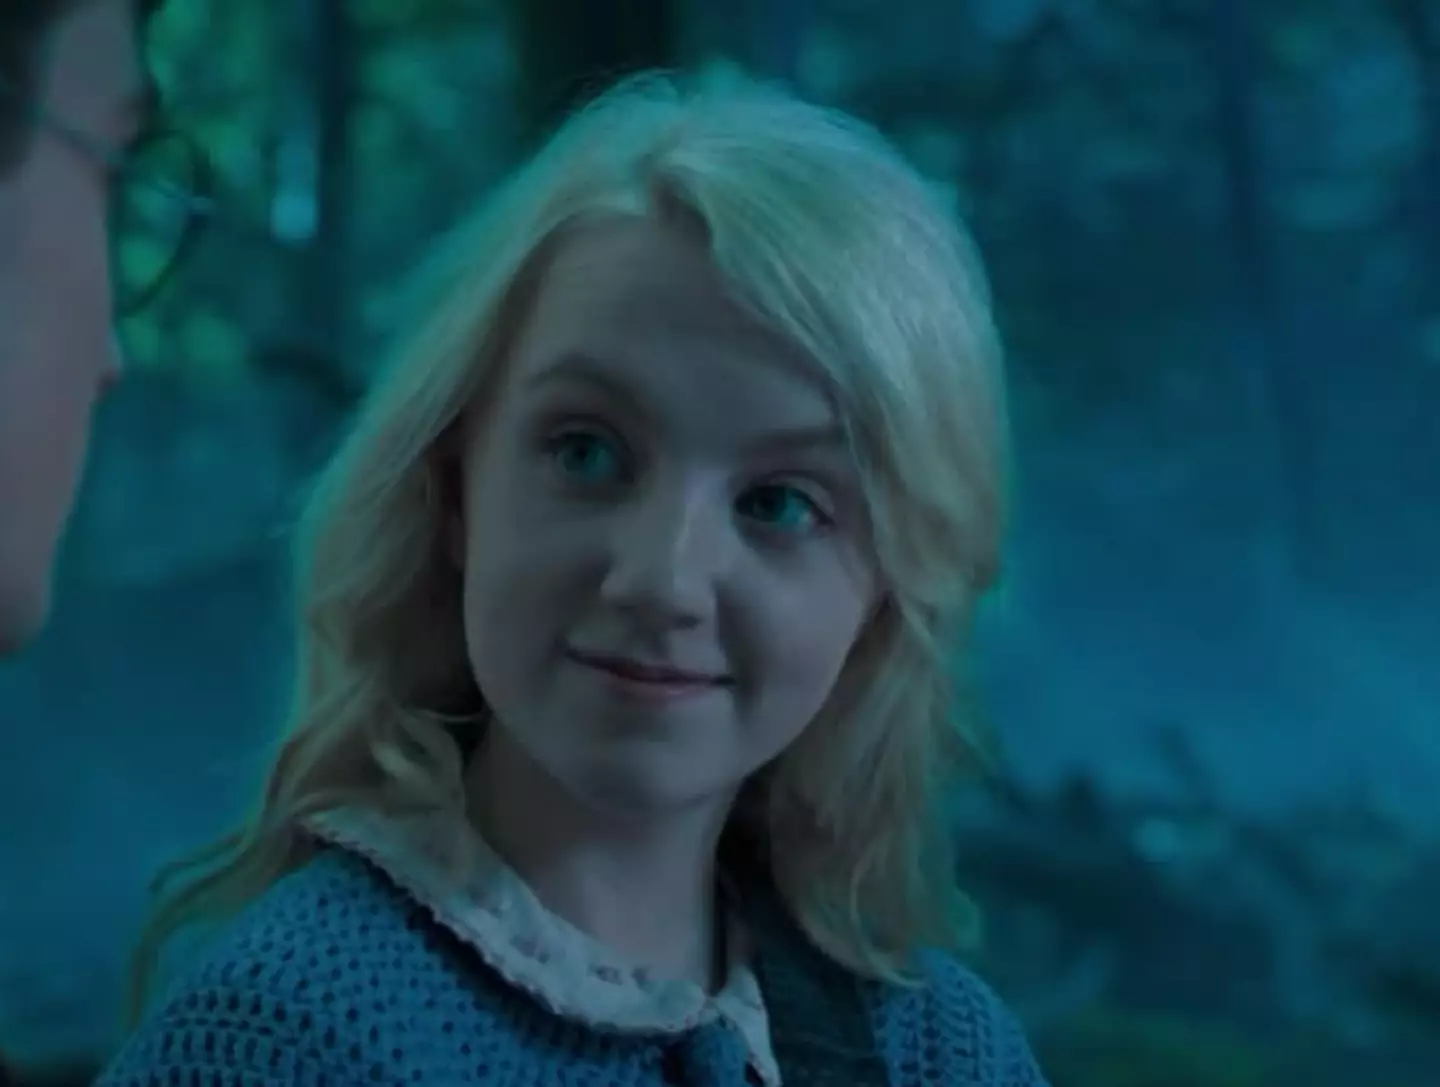 Evanna Lynch joined Harry Potter in Order of the Phoenix.